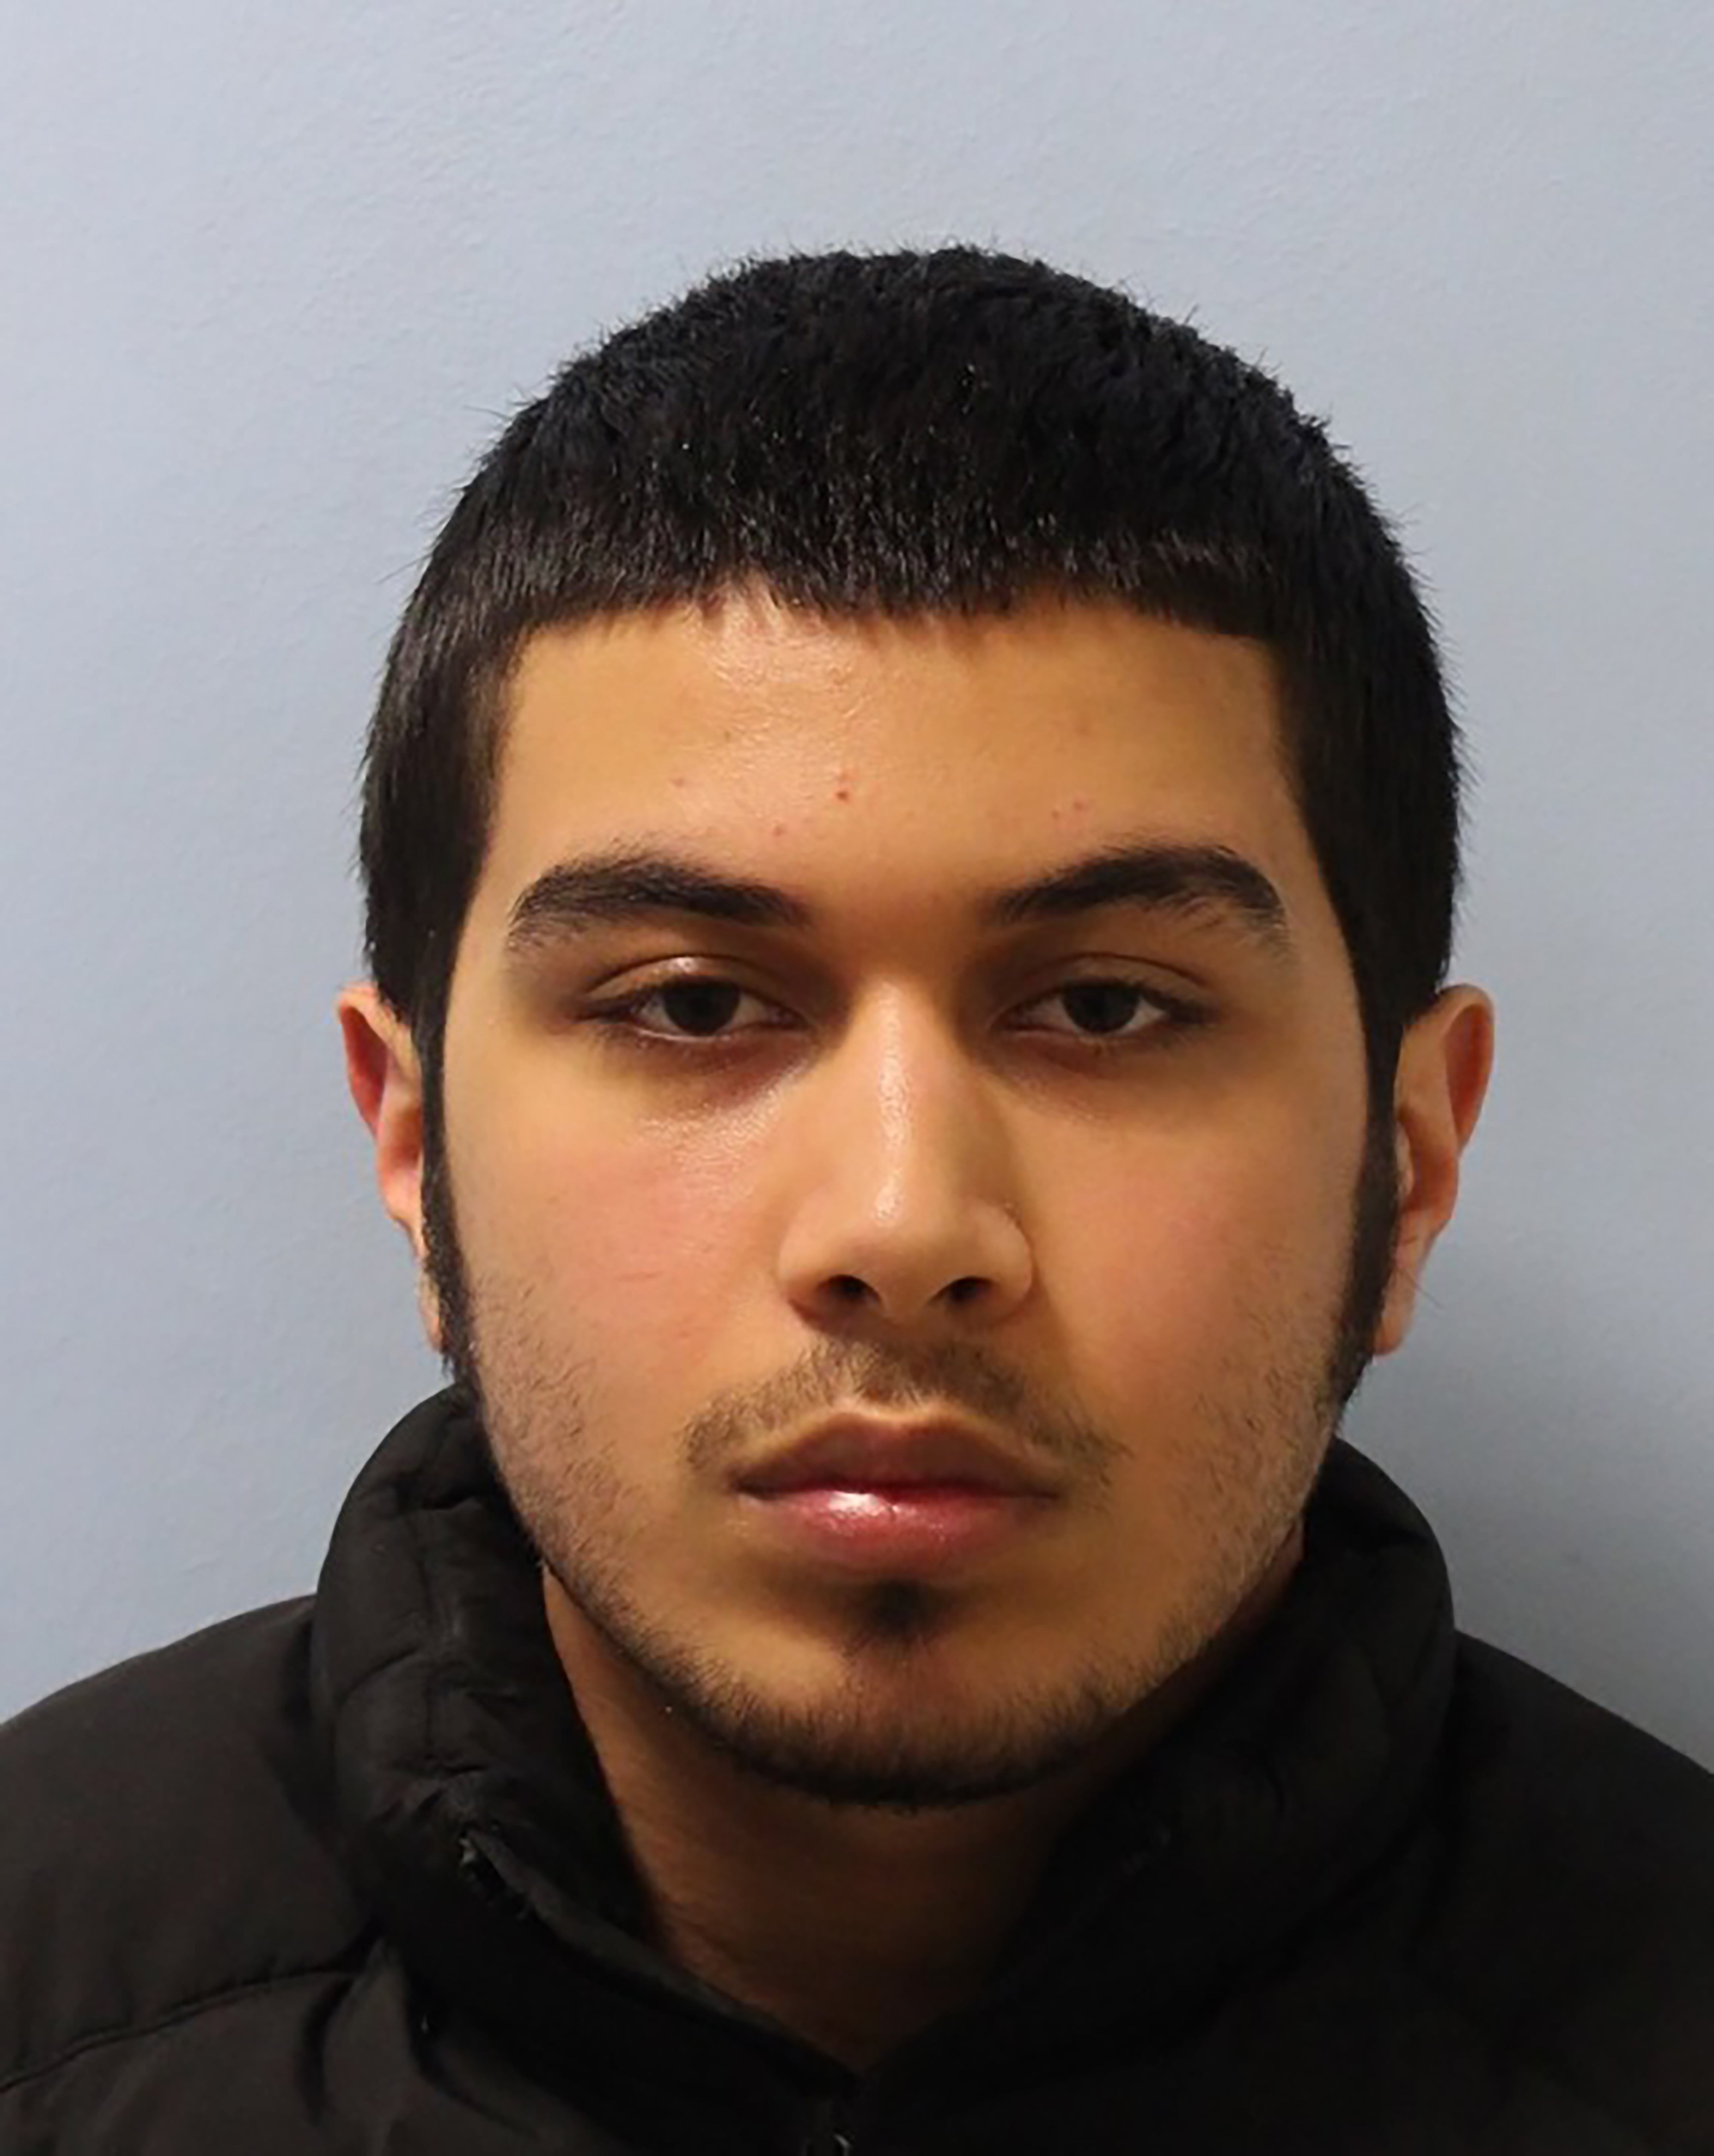 Leon Alan Rashid, 20, has been jailed for the attack